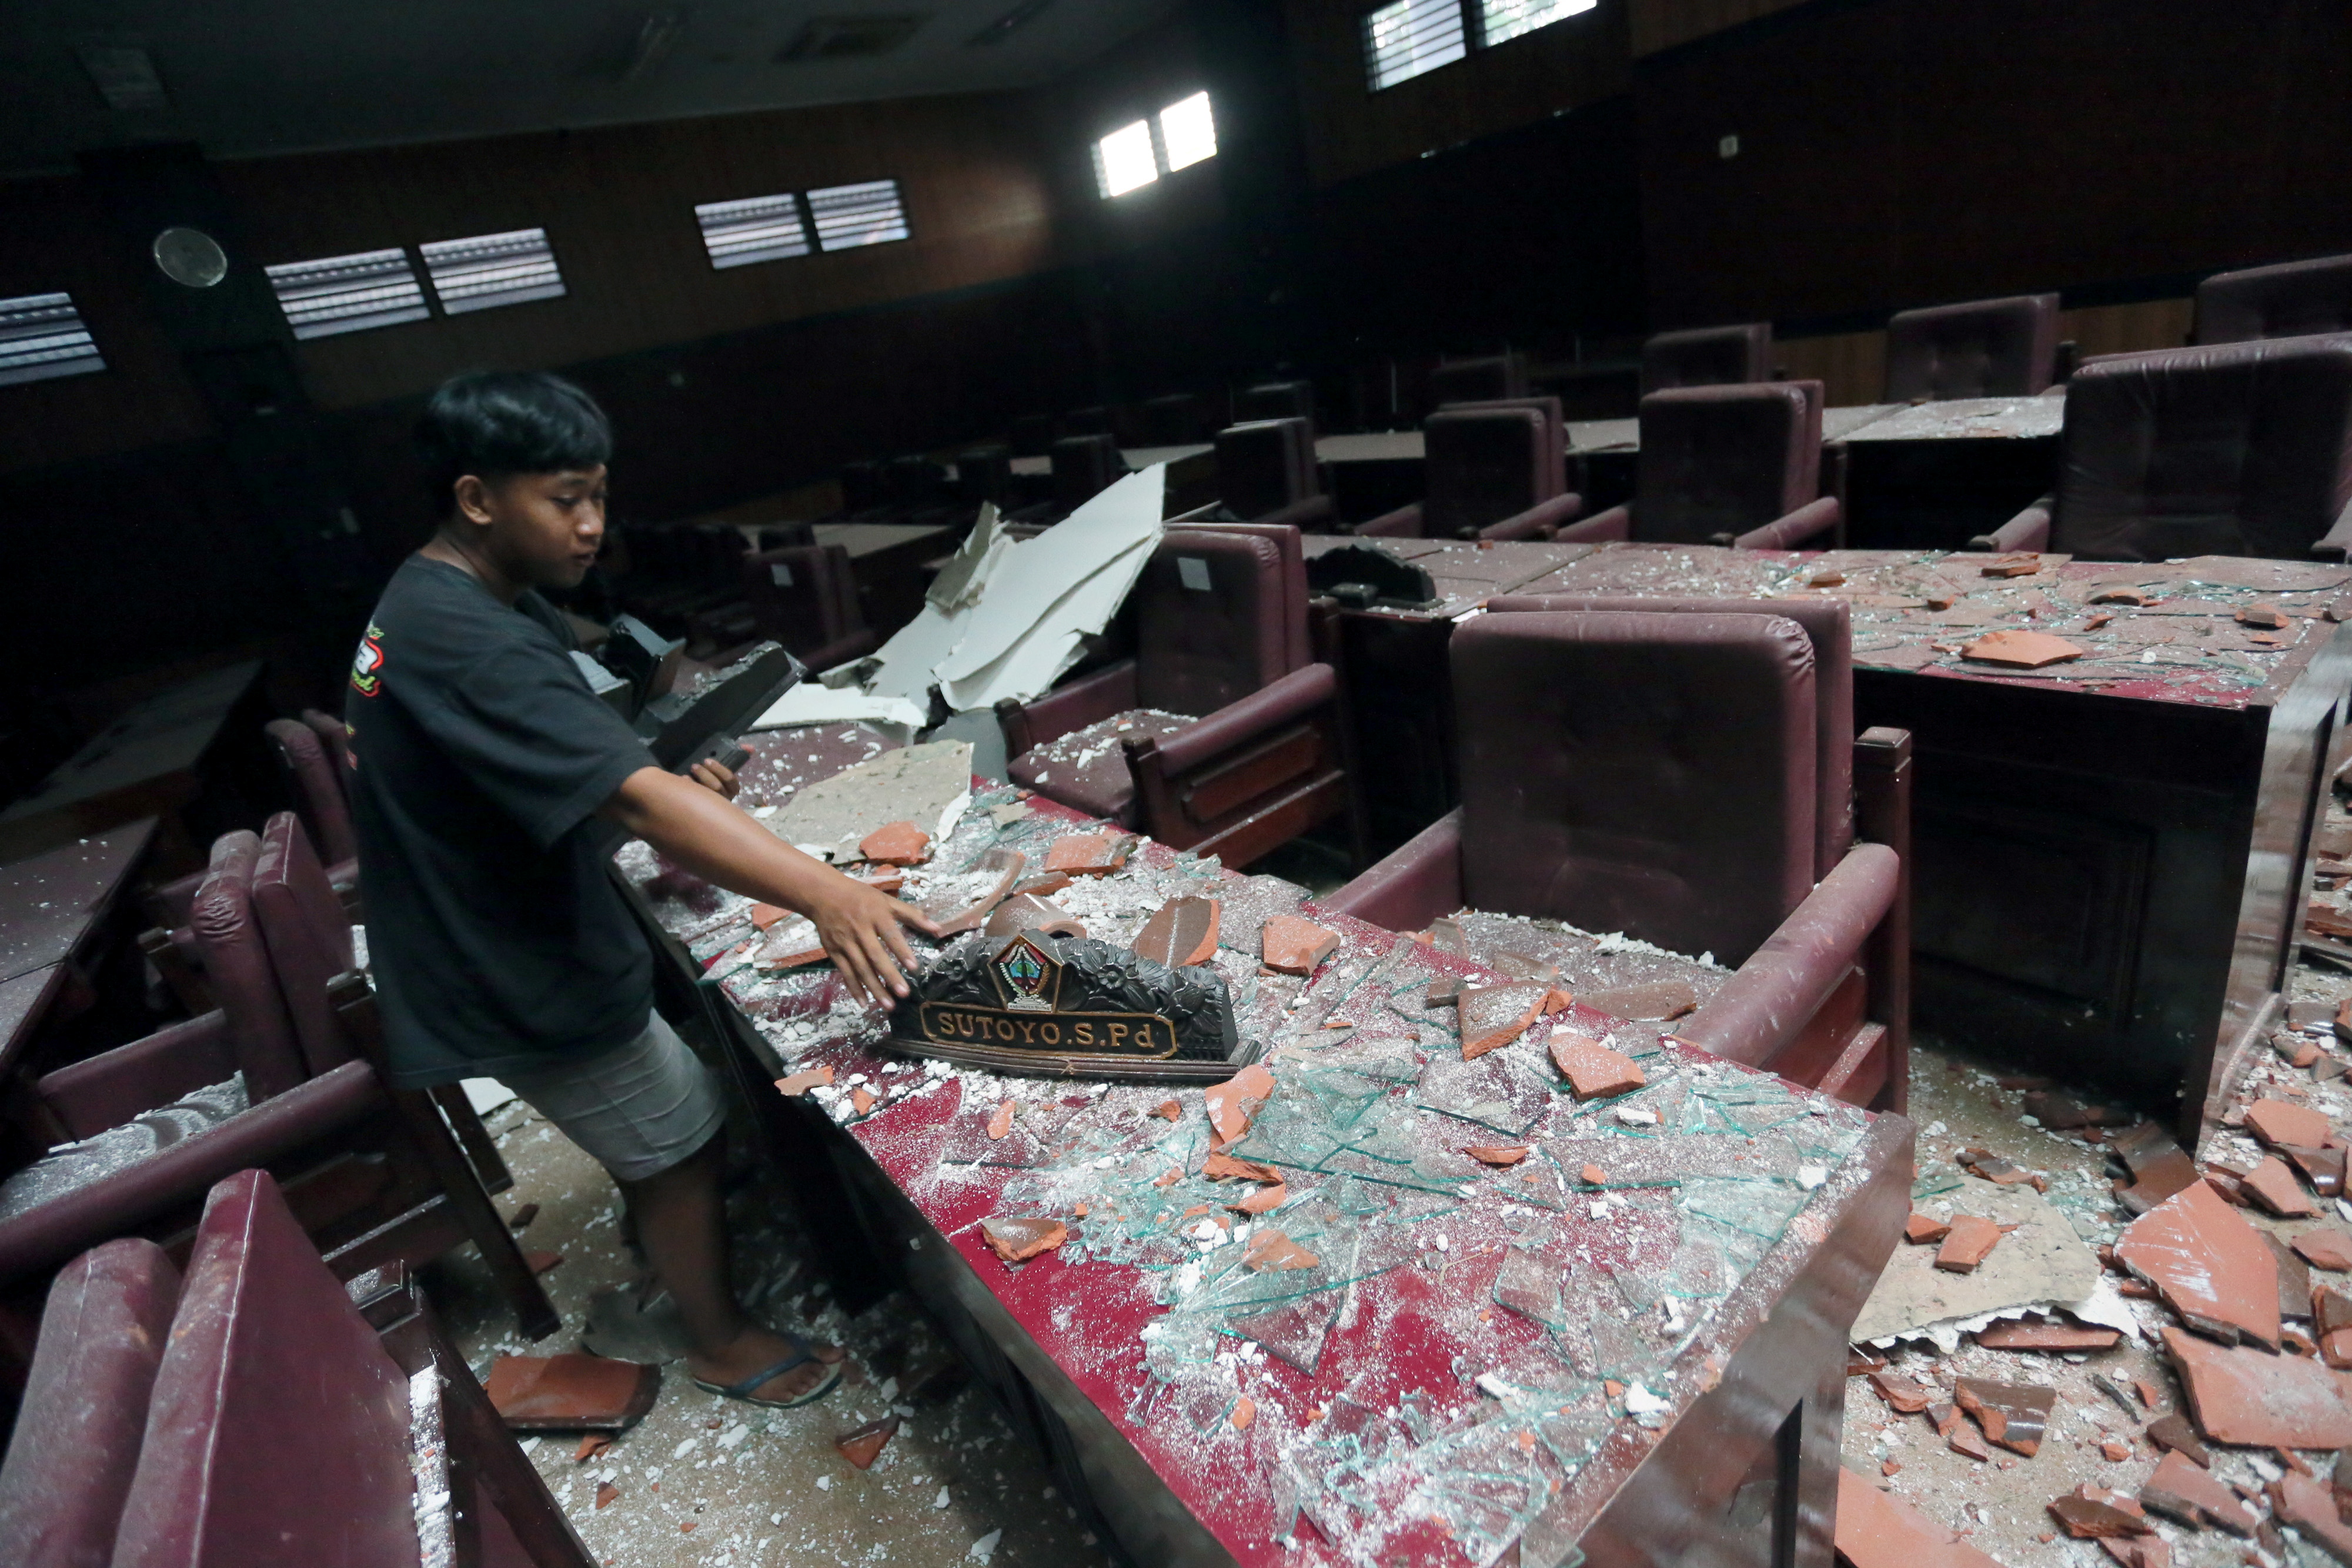 A man cleans up a damaged courtroom affected by an earthquake of magnitude 5.9 struck in the ocean 91 km (57 miles) south-southeast of Blitar